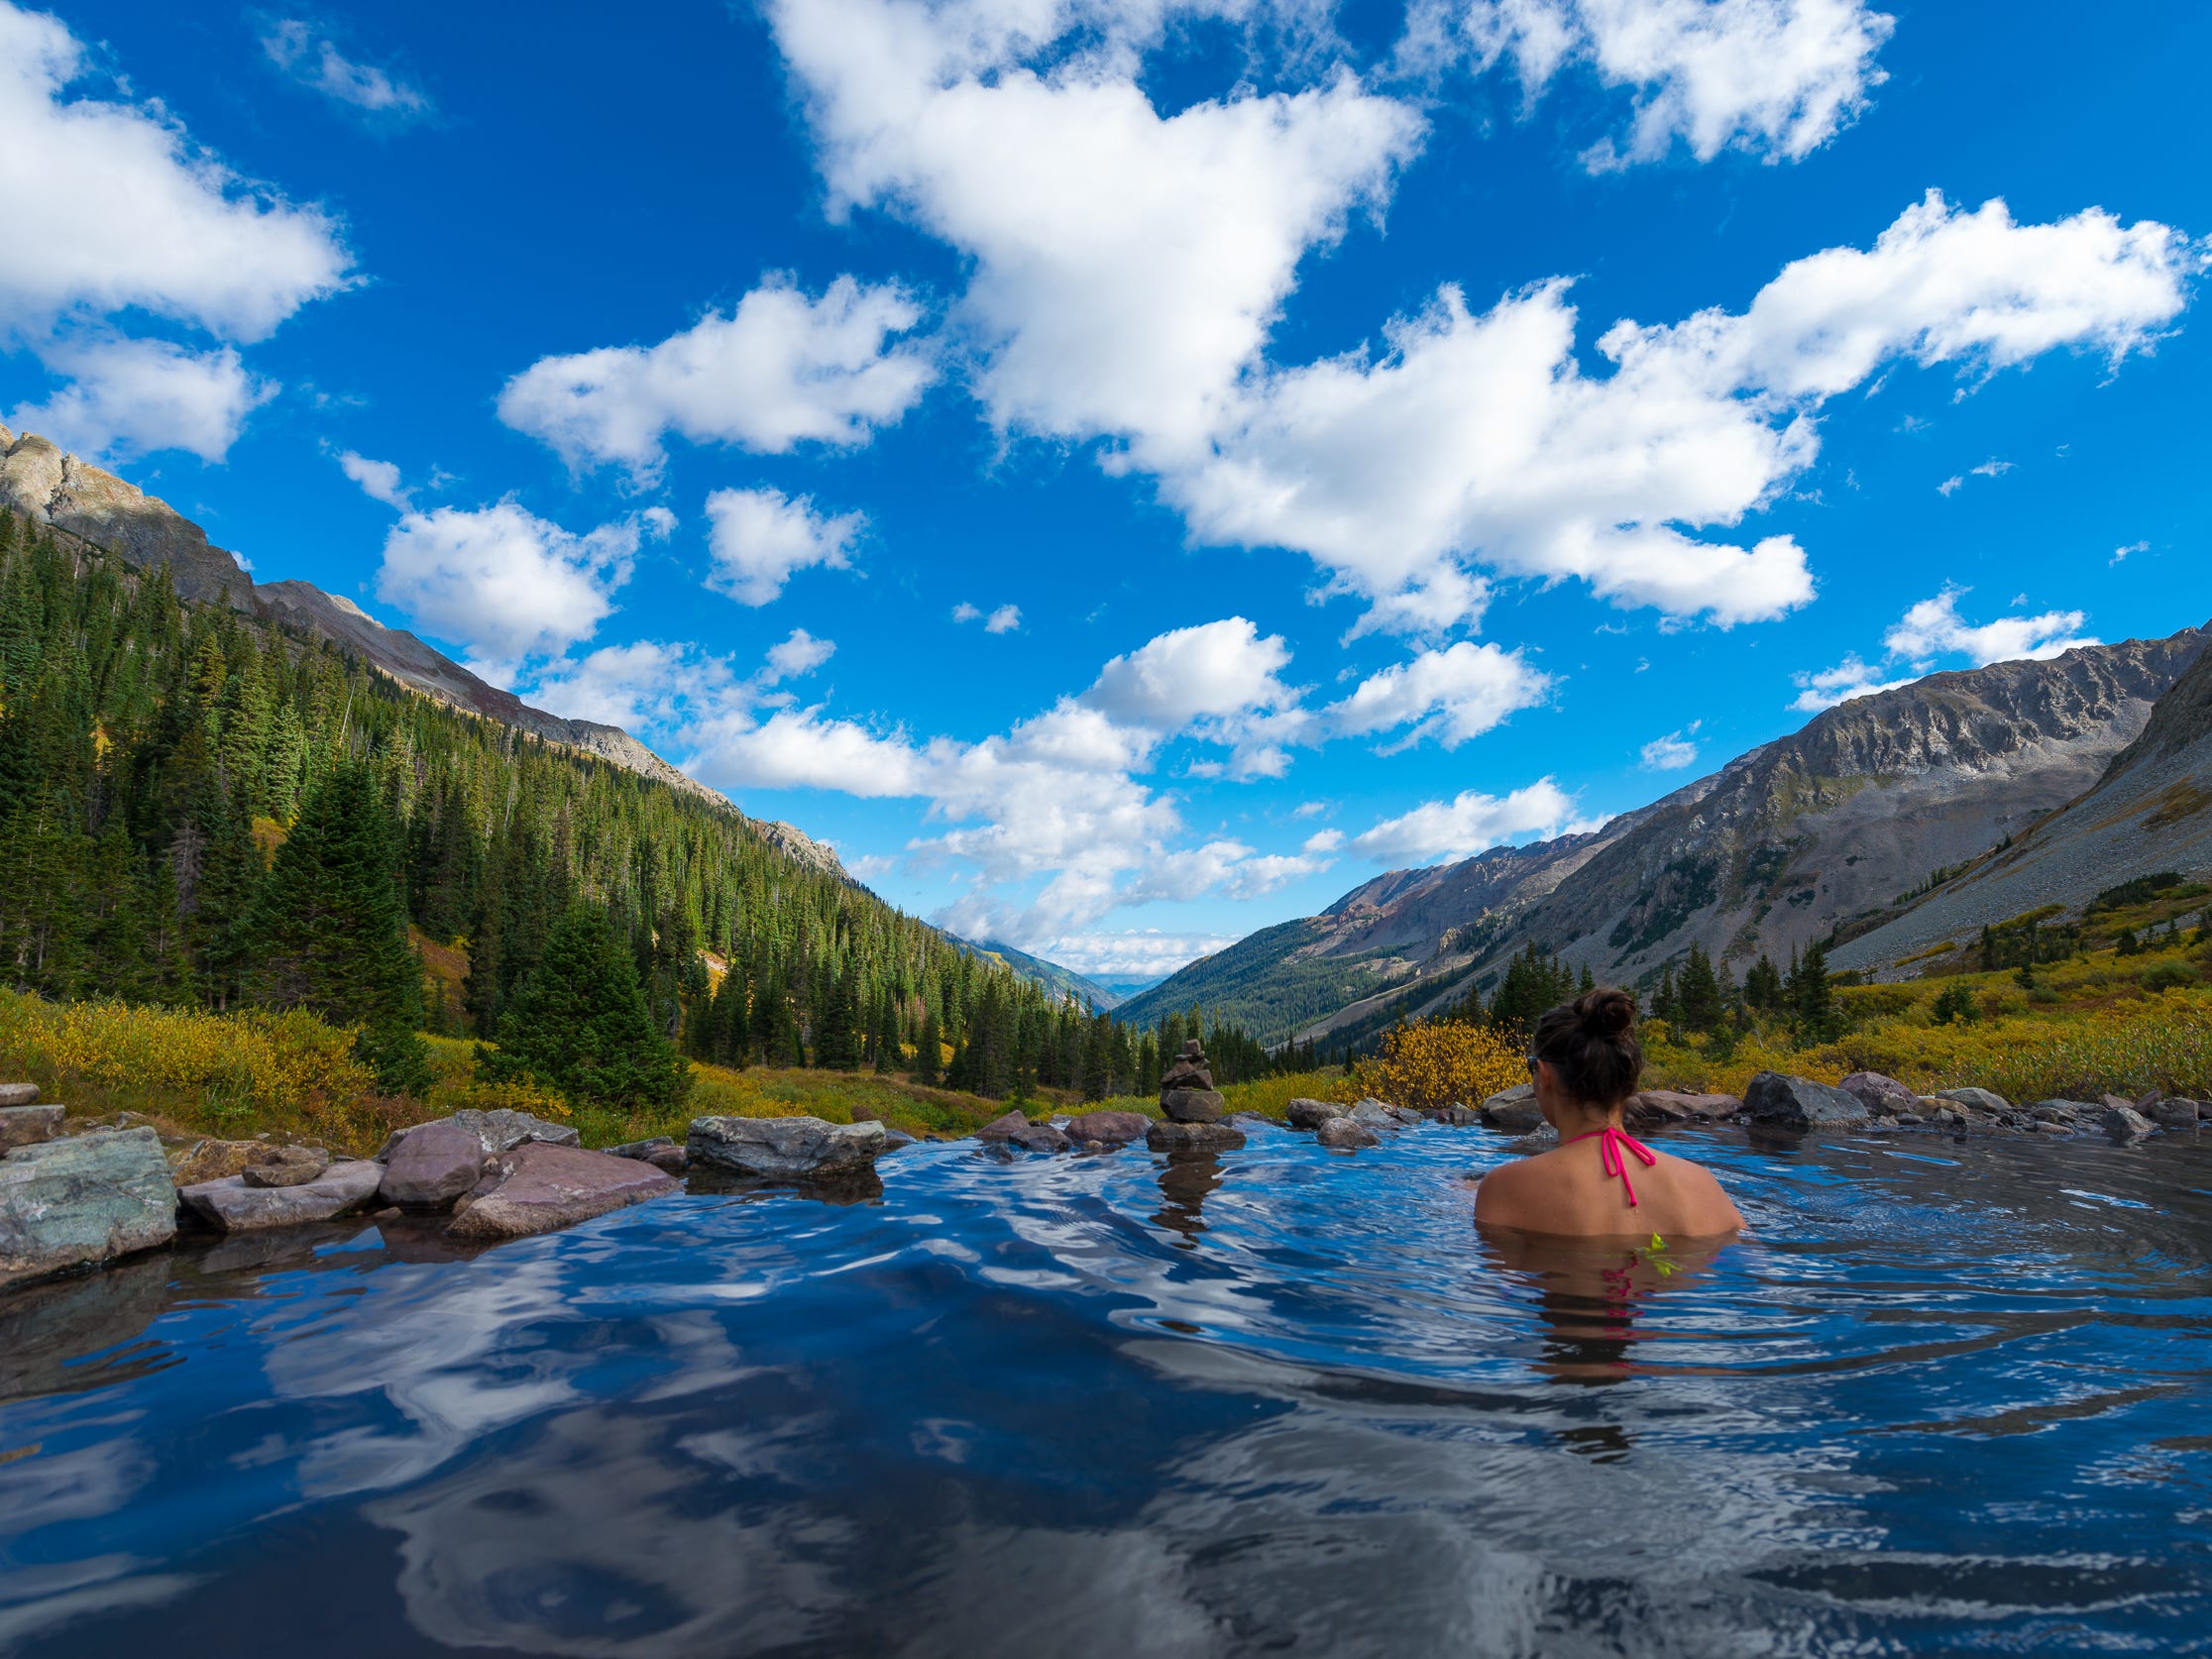 <p>Nothing is better than <a href="https://www.alltrails.com/trail/us/colorado/conundrum-creek-trail-to-conundrum-hot-springs">hiking along</a> the stunning Elk Mountains and ending your journey with a dip in a hot spring. </p><p>"The views are stunning along the whole hike, but especially from the 102-degree pool," Paul Ronto, Content Director at <a href="http://runrepeat.com">RunRepeat</a> and avid outdoorsmen, told Insider.</p><p>He also advised that permits are required, so make sure to read <a href="https://www.recreation.gov/permits/273336">how to get one</a> before making the trek.</p>